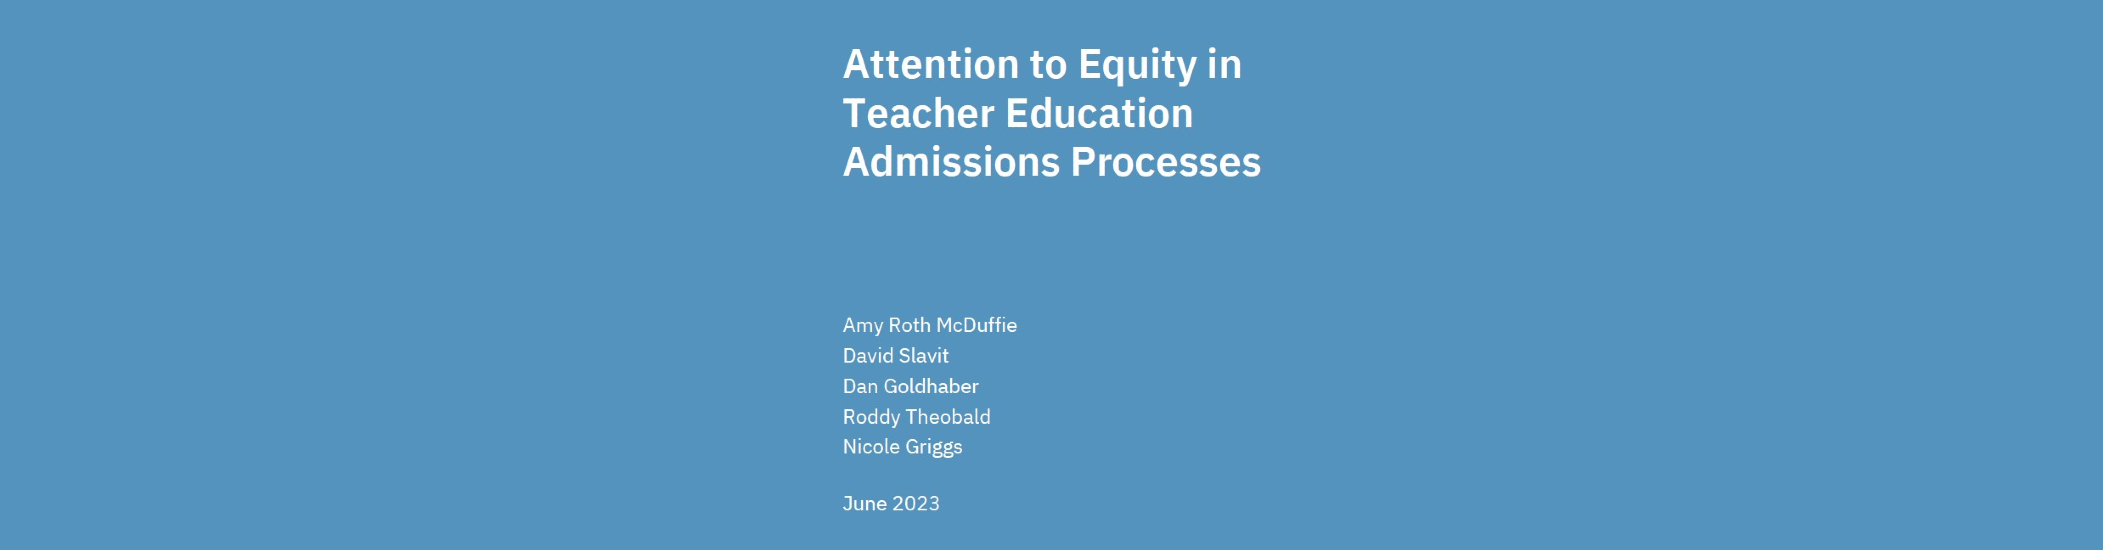 Attention to Equity in Teacher Education Admissions Processes